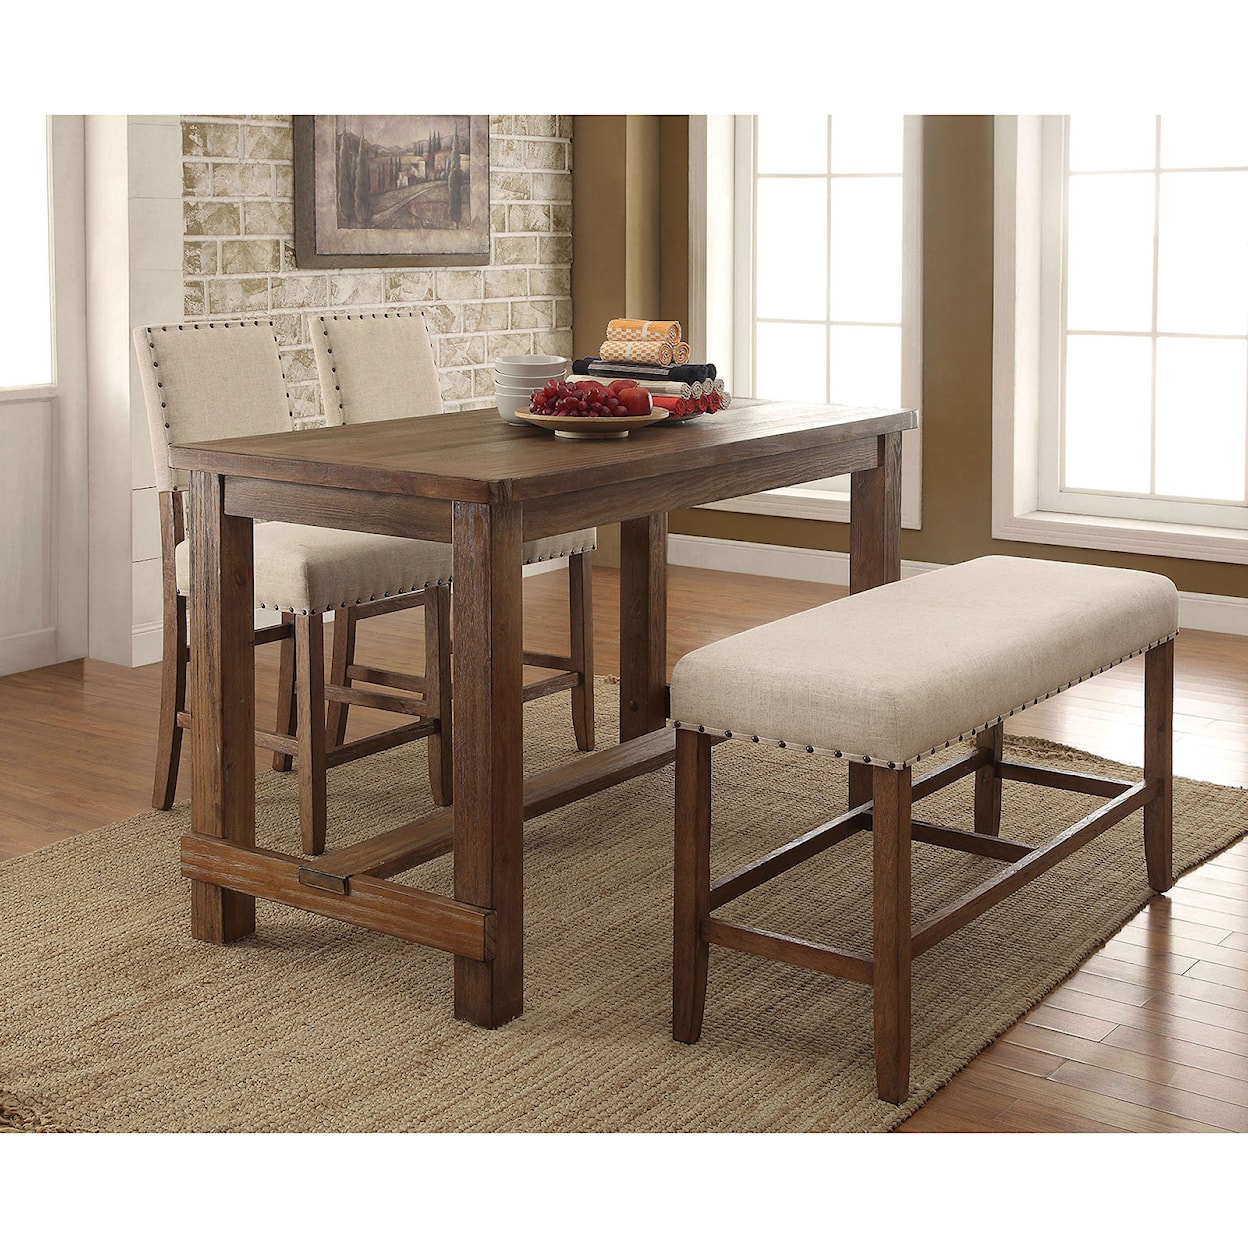 Furniture of America Sania Counter Height Kitchen Table